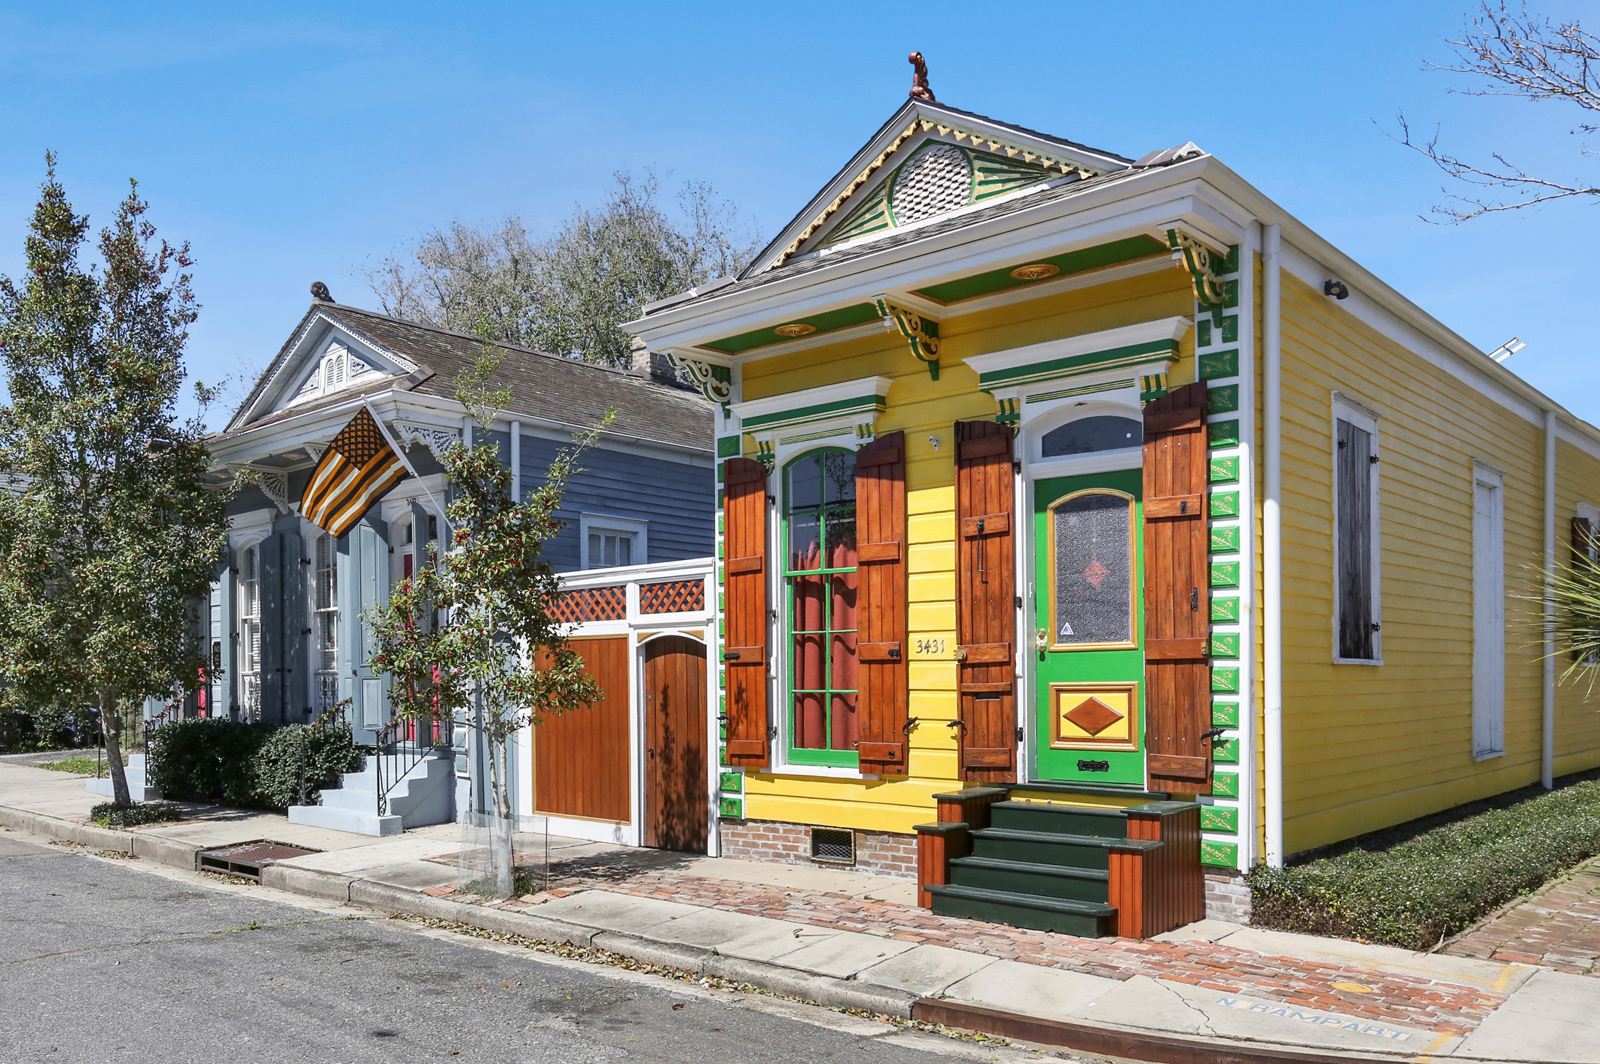 Faubourg Marigny & Bywater